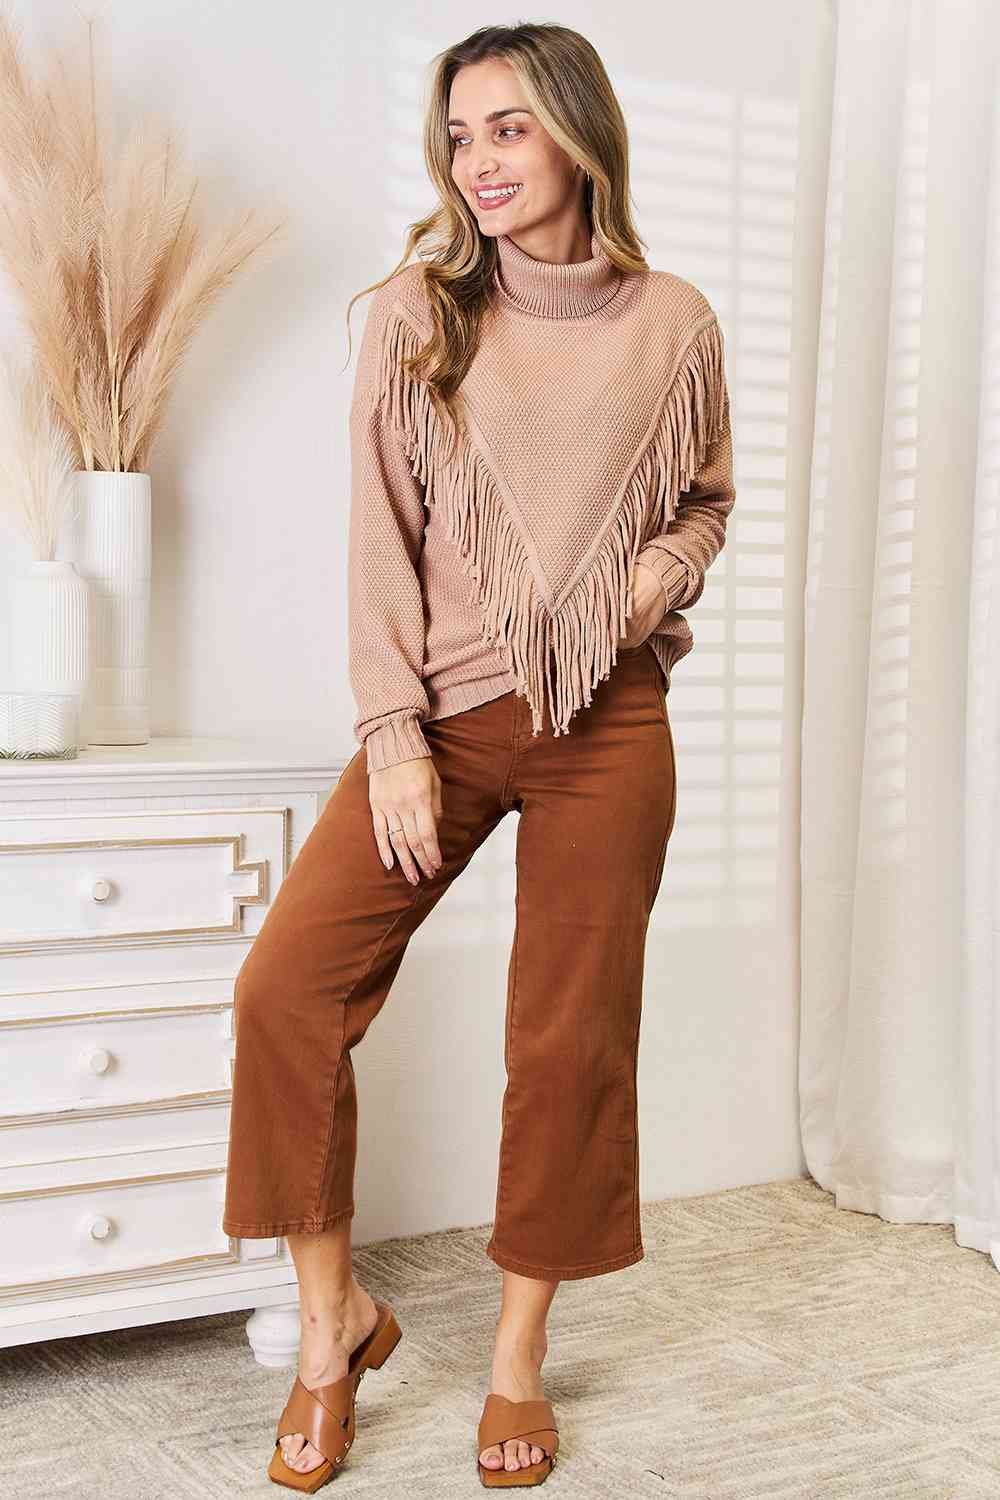 Woven Right Turtleneck Fringe Front Long Sleeve Sweater - Pullover Sweaters - FITGGINS